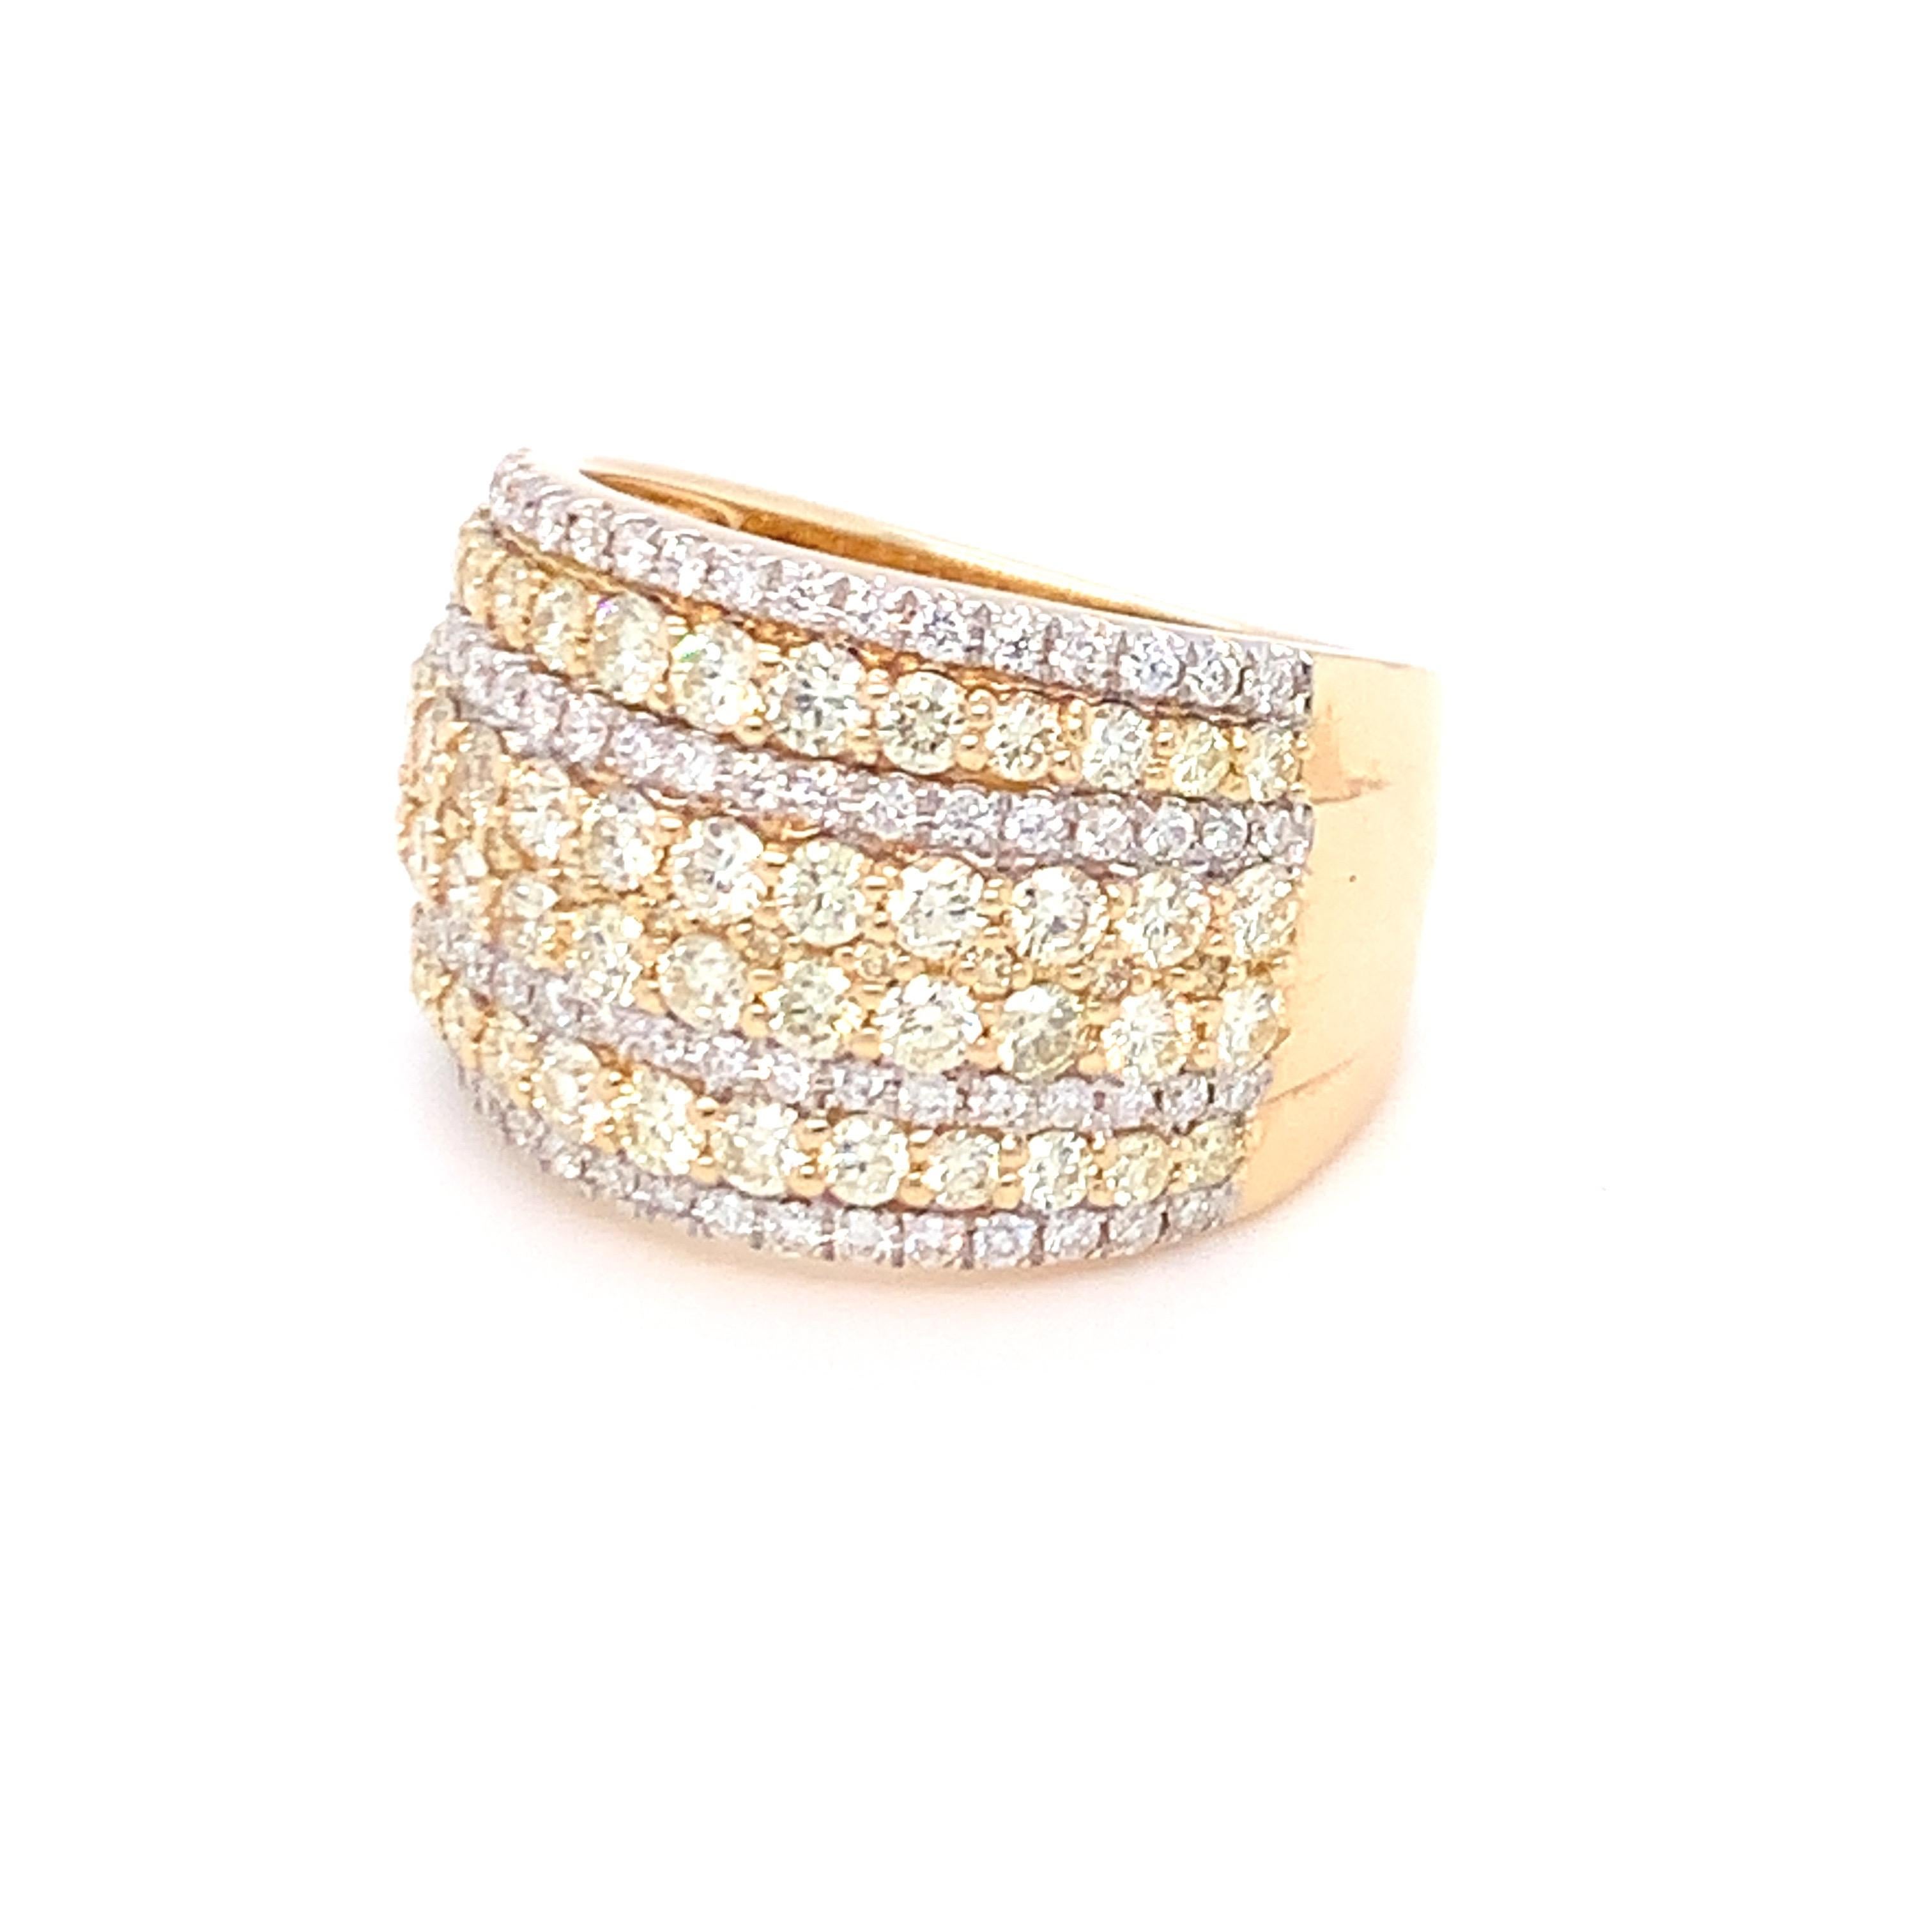 2.08 Carat Diamond Band Ring in 14k Yellow Gold For Sale 4